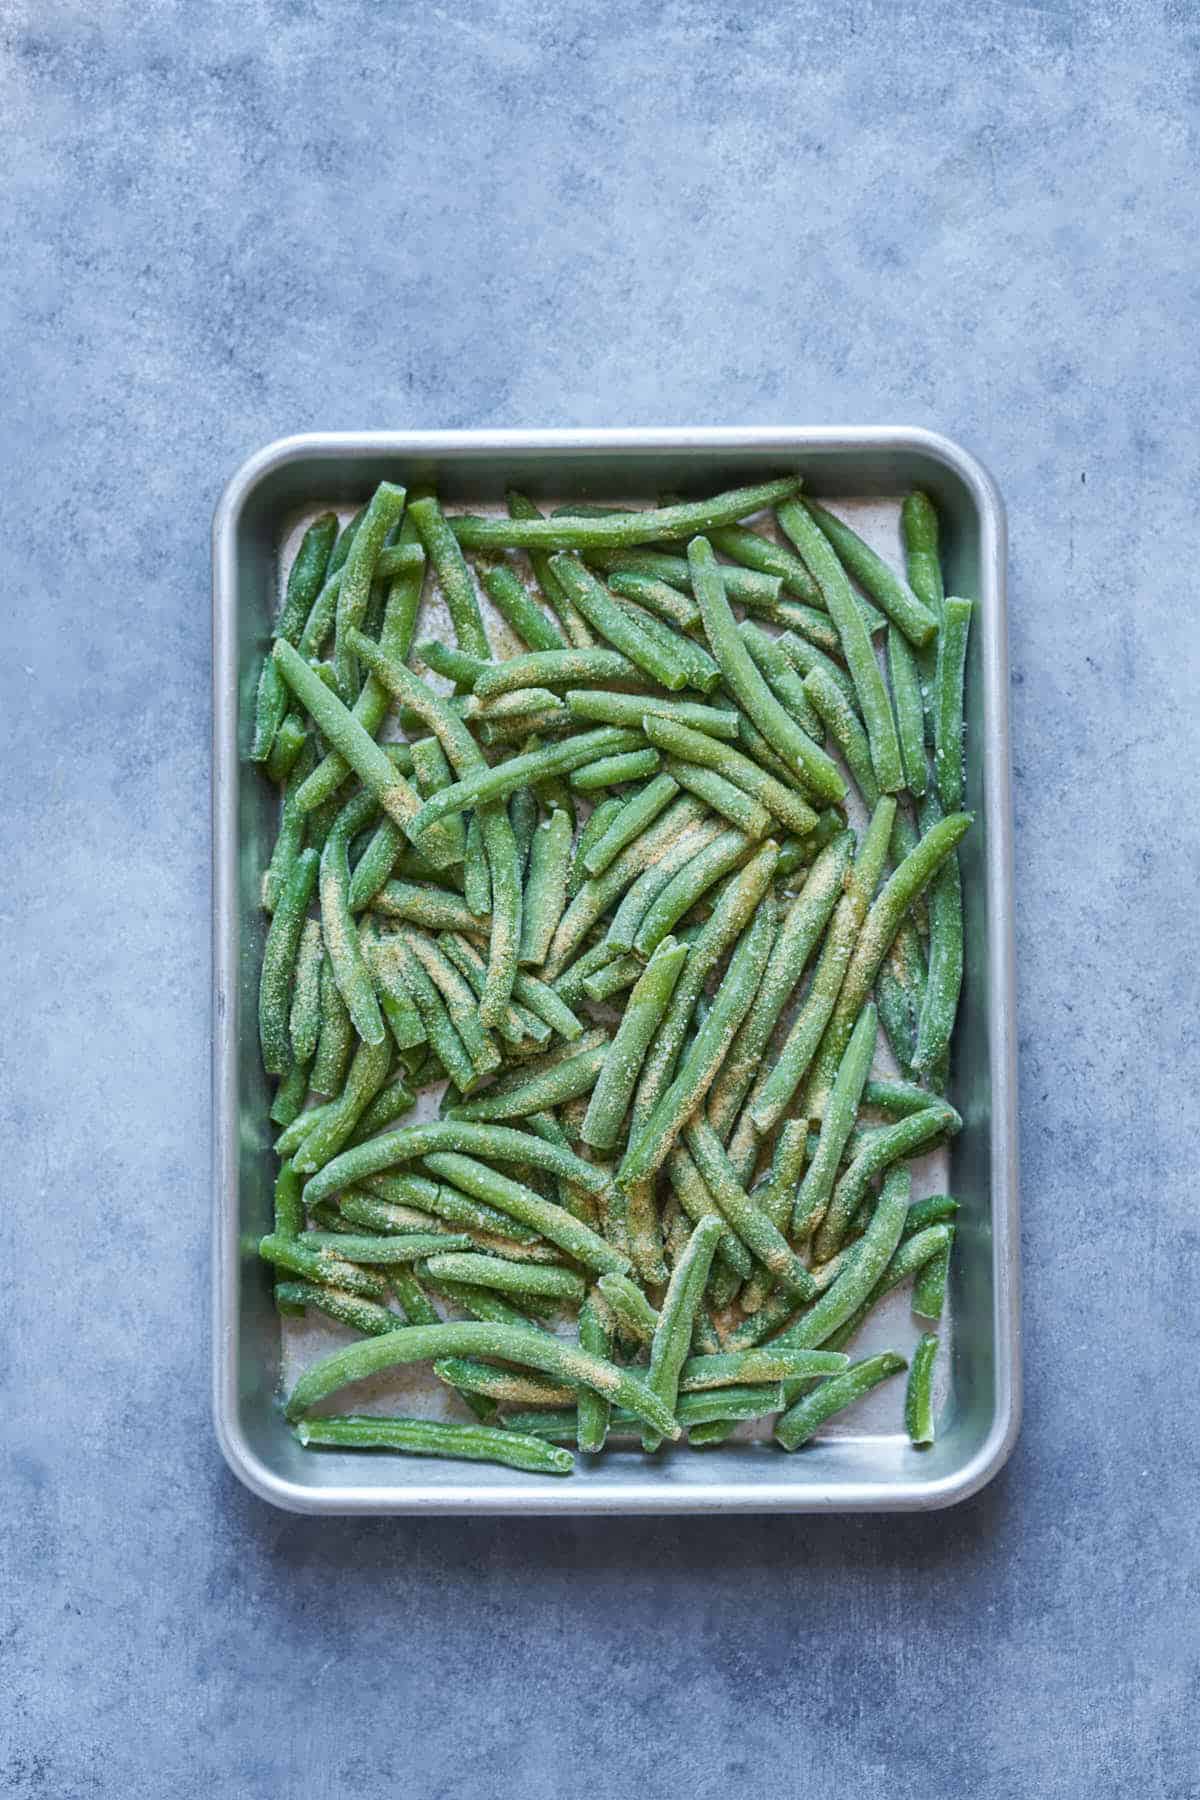 Frozen green beans with oil, garlic powder, and salt and pepper.